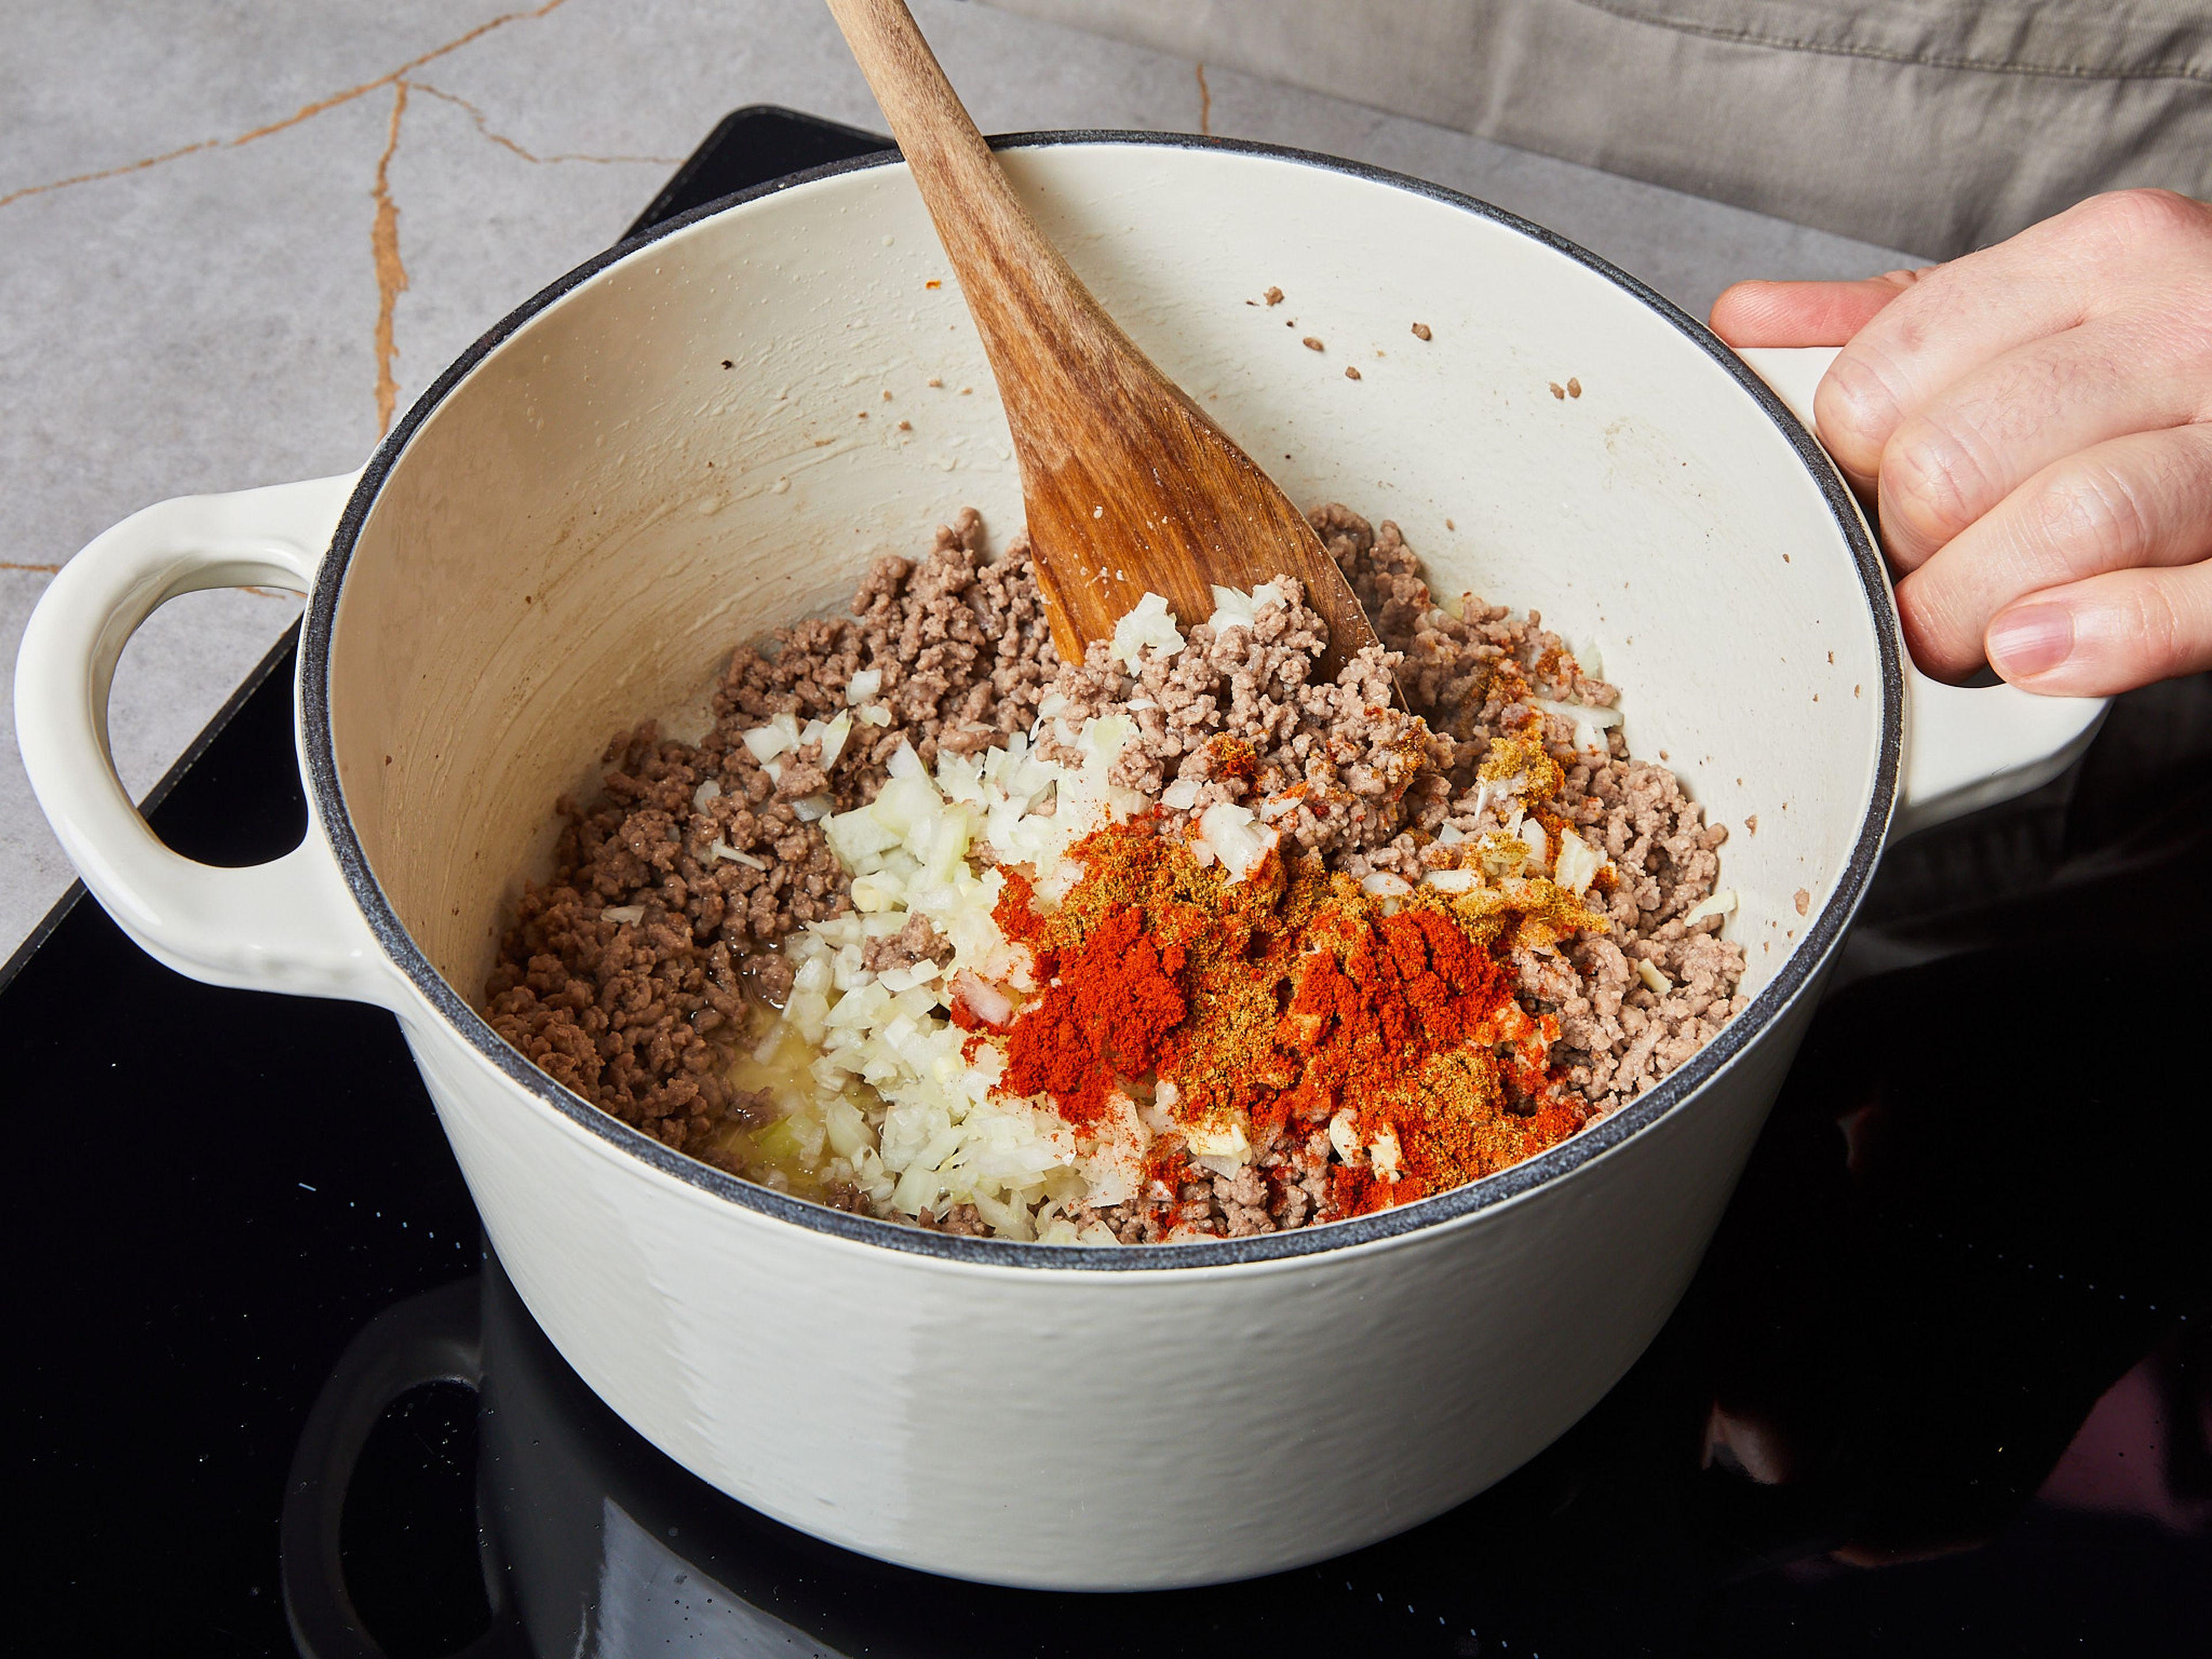 Heat up some vegetable oil in a large saucepan over medium heat. Add ground beef and sauté for approx. 2–3 min. until browned. Then add cumin, paprika powder, chili, garlic, and onion. Avoid stirring too much to ensure that the meat stays flavorful.